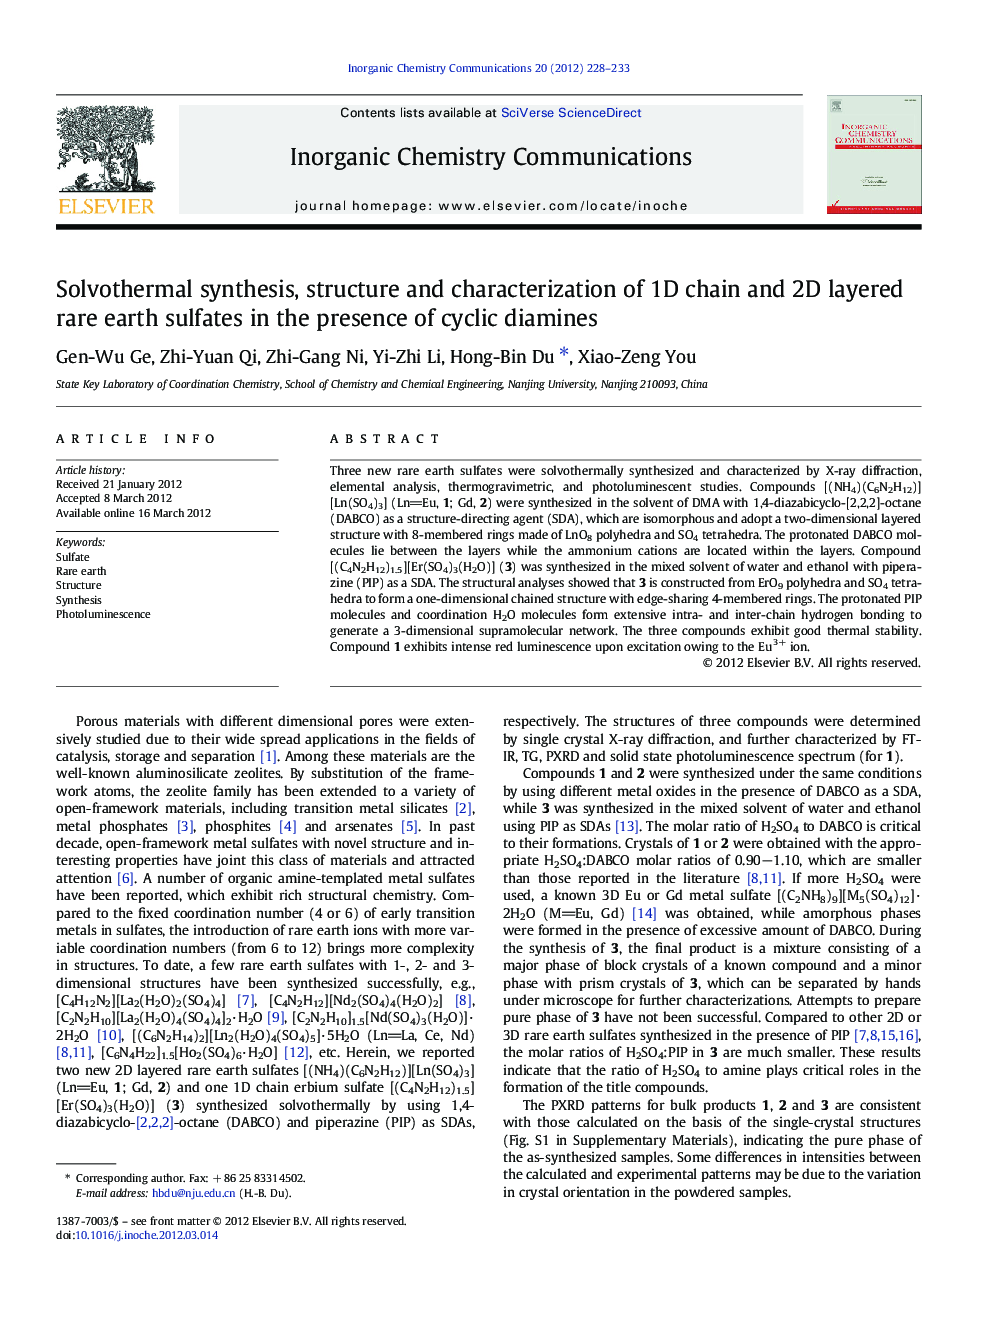 Solvothermal synthesis, structure and characterization of 1D chain and 2D layered rare earth sulfates in the presence of cyclic diamines